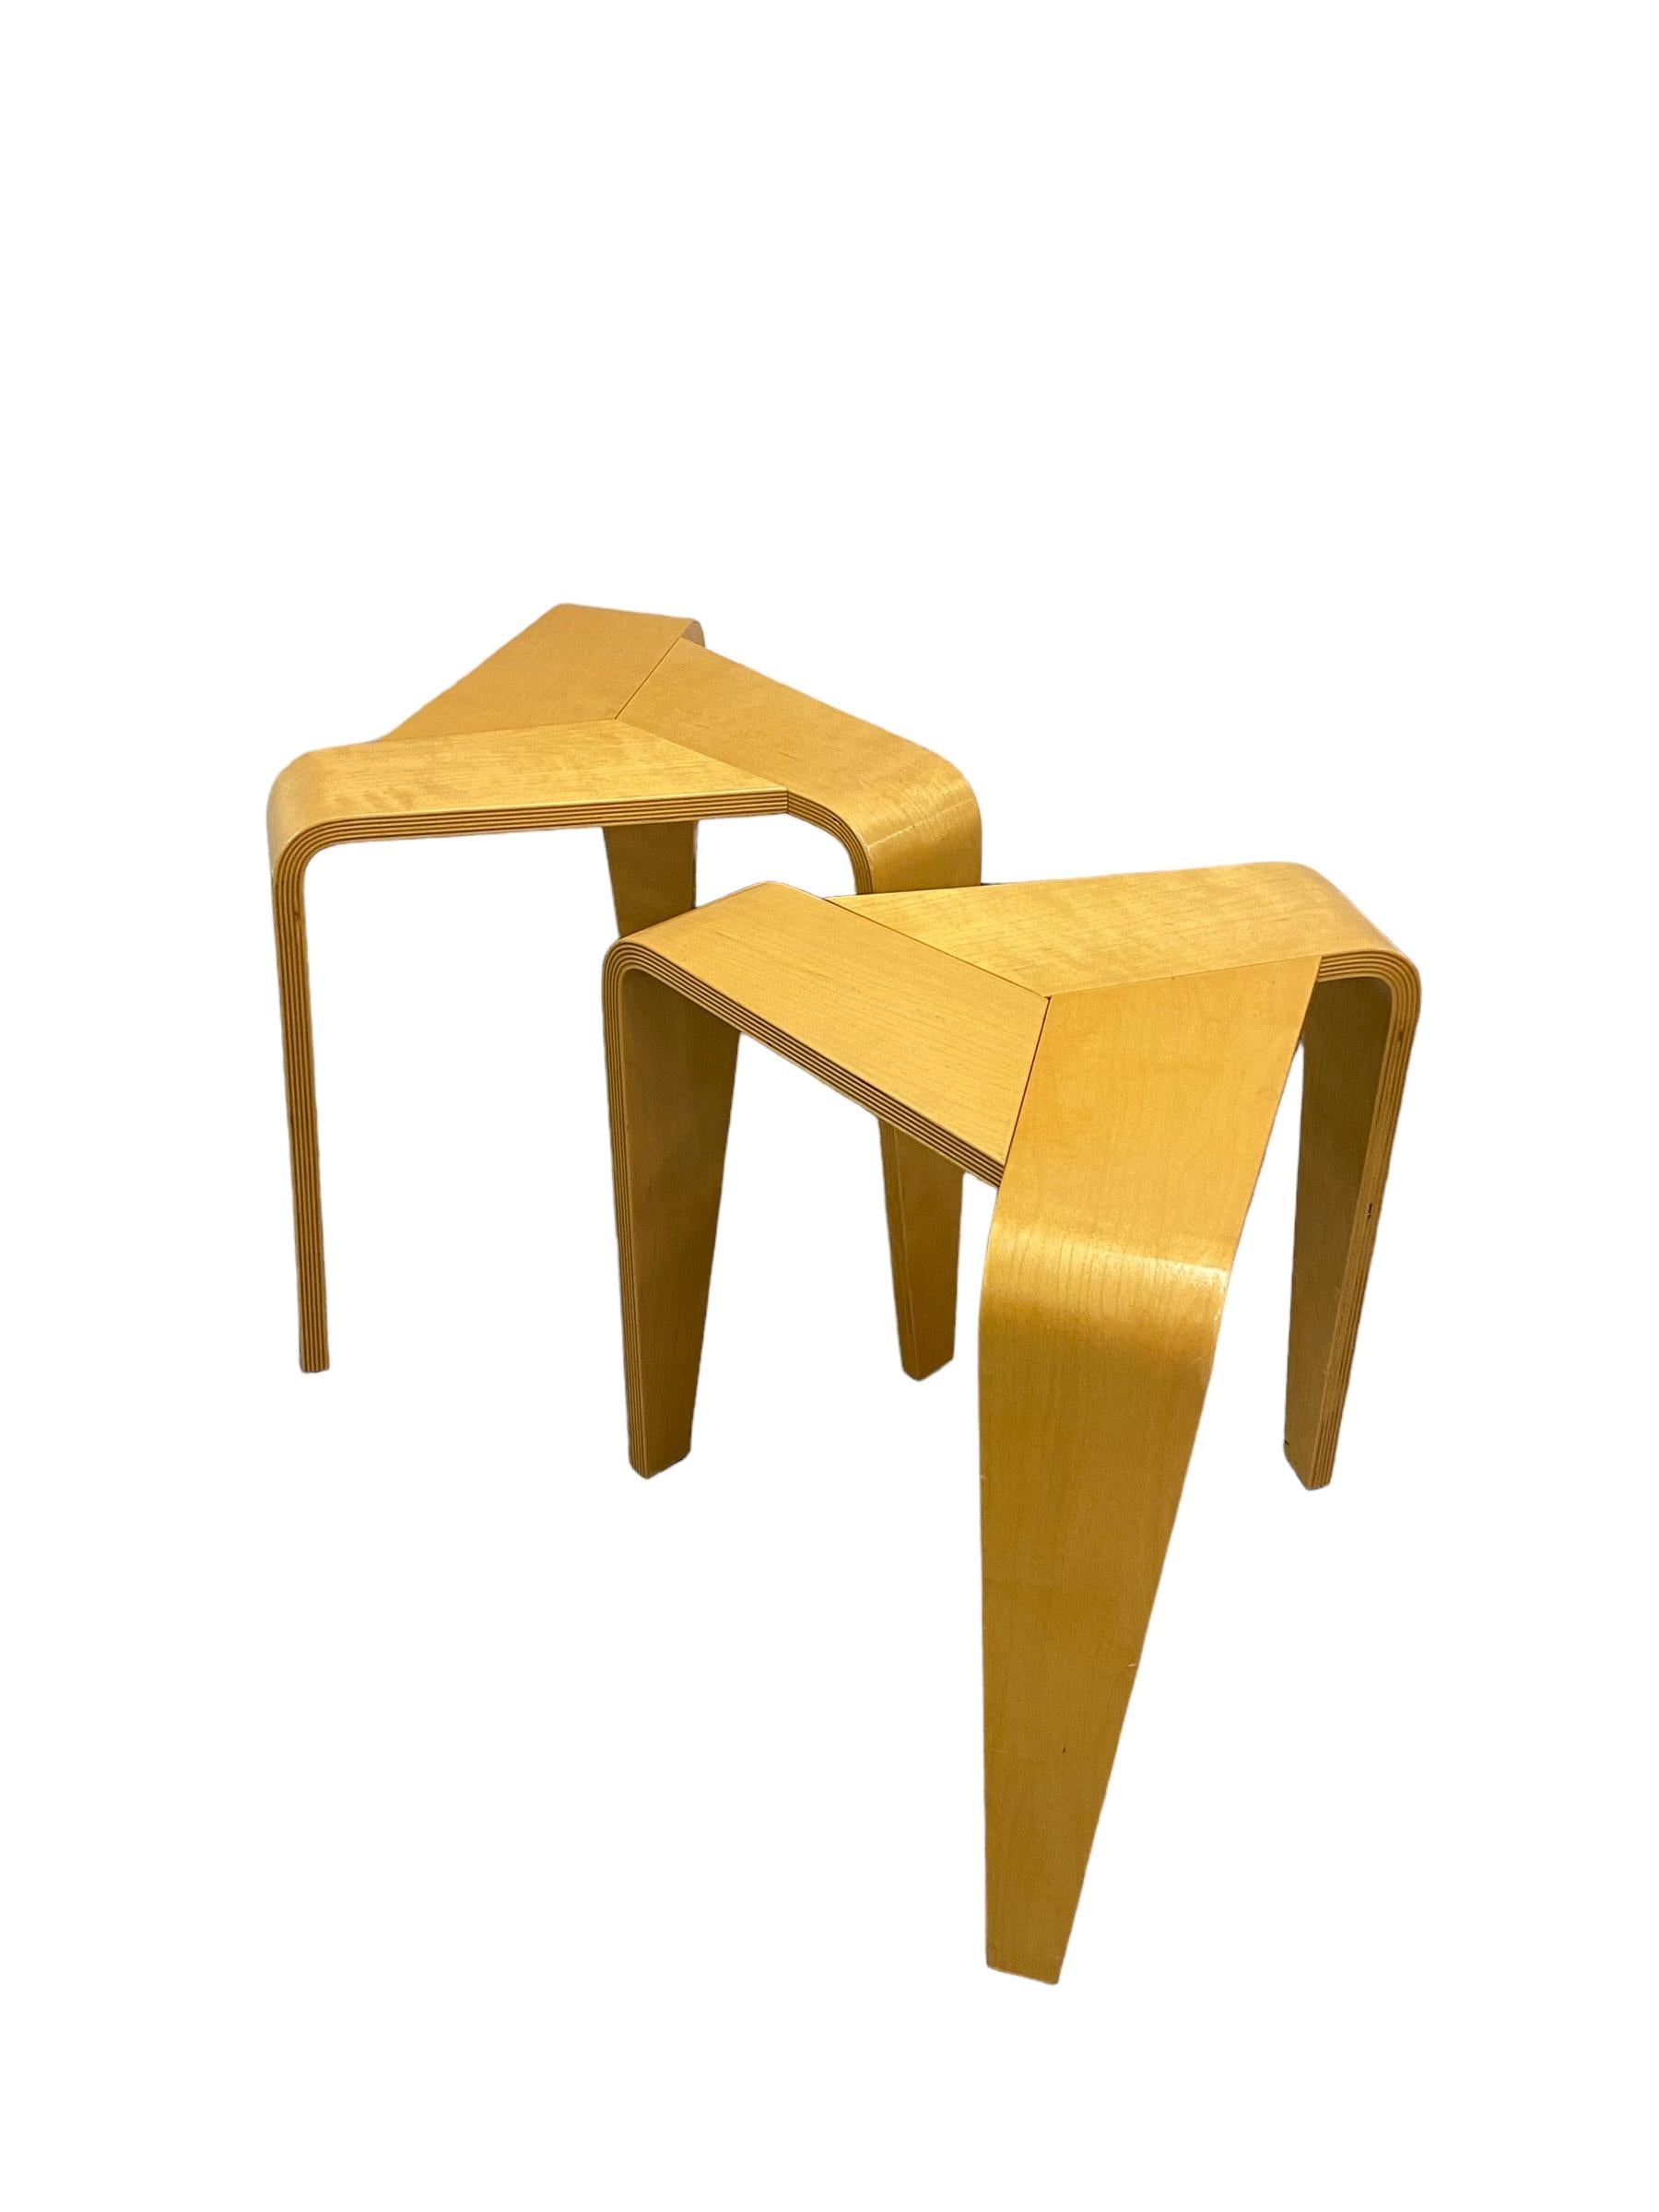 A truely brilliant Finnish designed stool with no screws, bolts or nails. The stool is only made up of three pieces that simply slide into place to create a stool. 

The stools are in full laminated birch and are in great original condition.